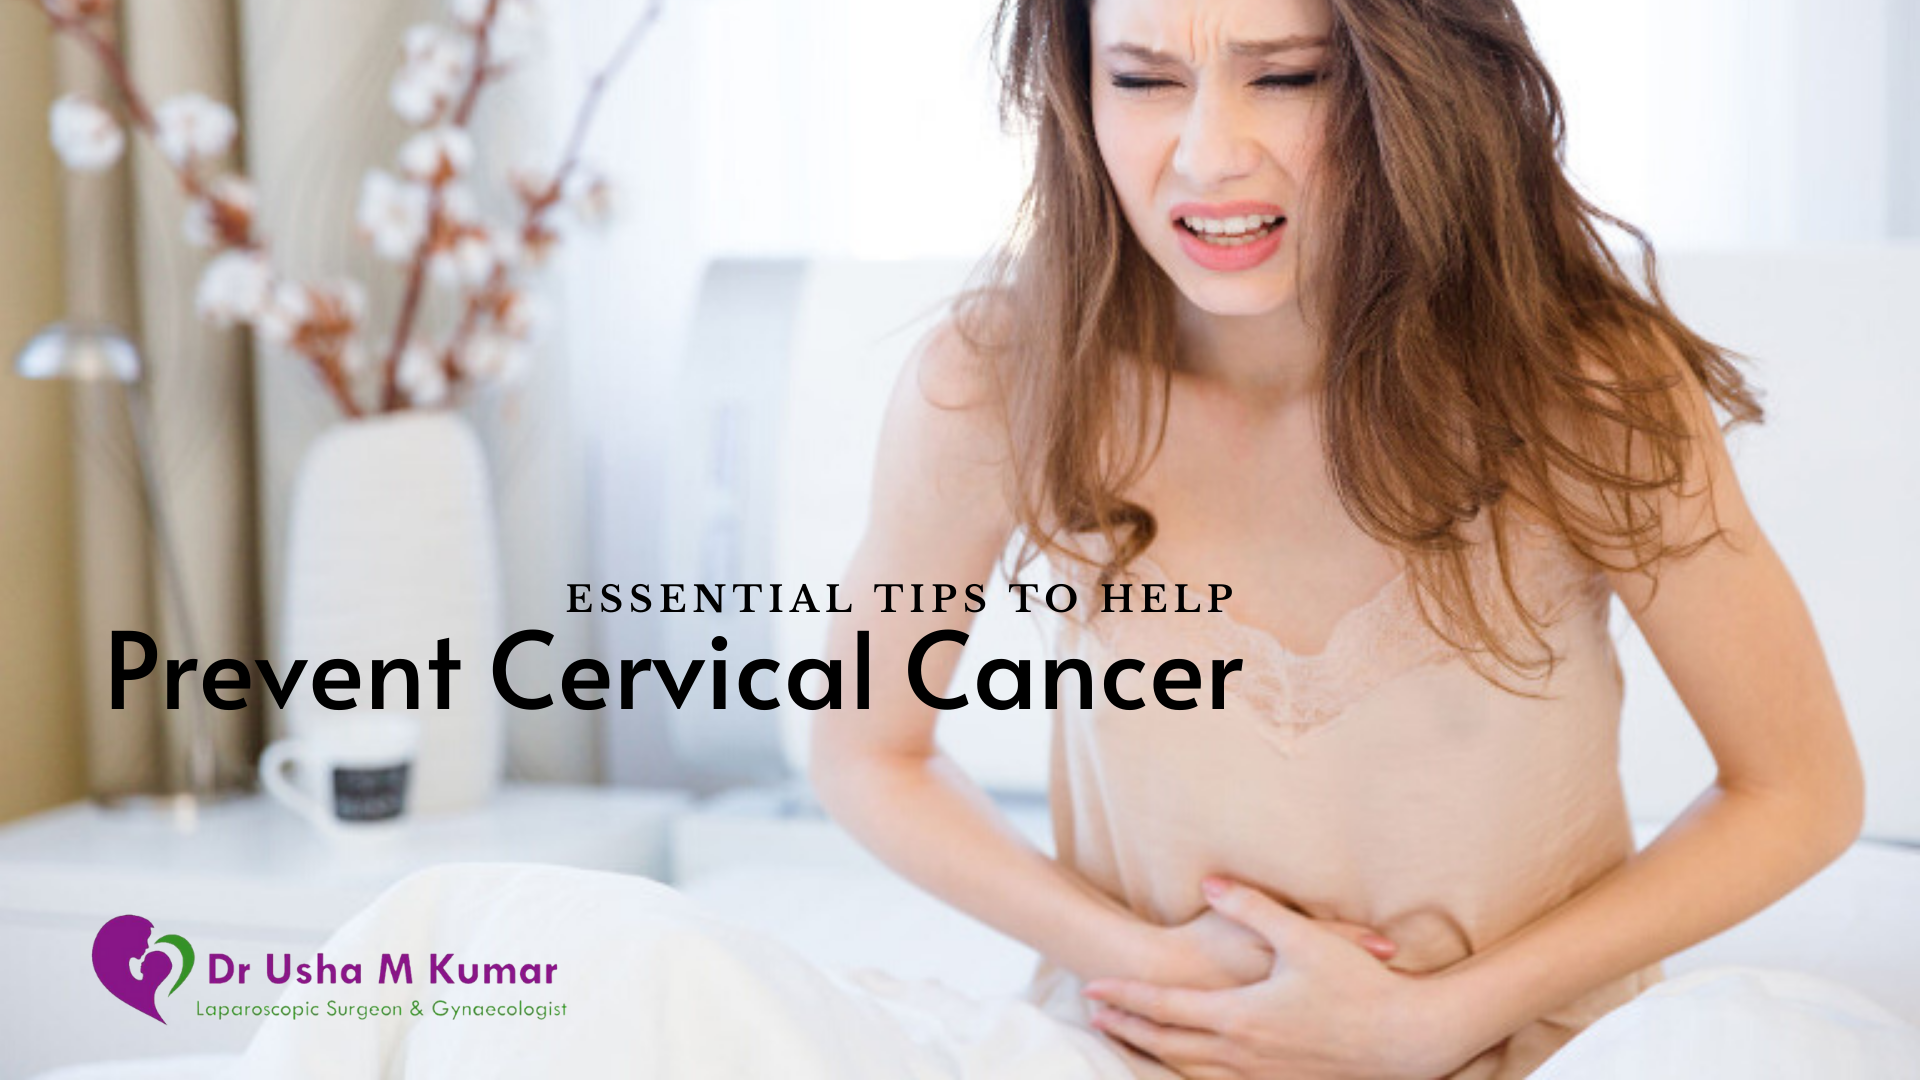 Essential tips to help prevent cervical cancer